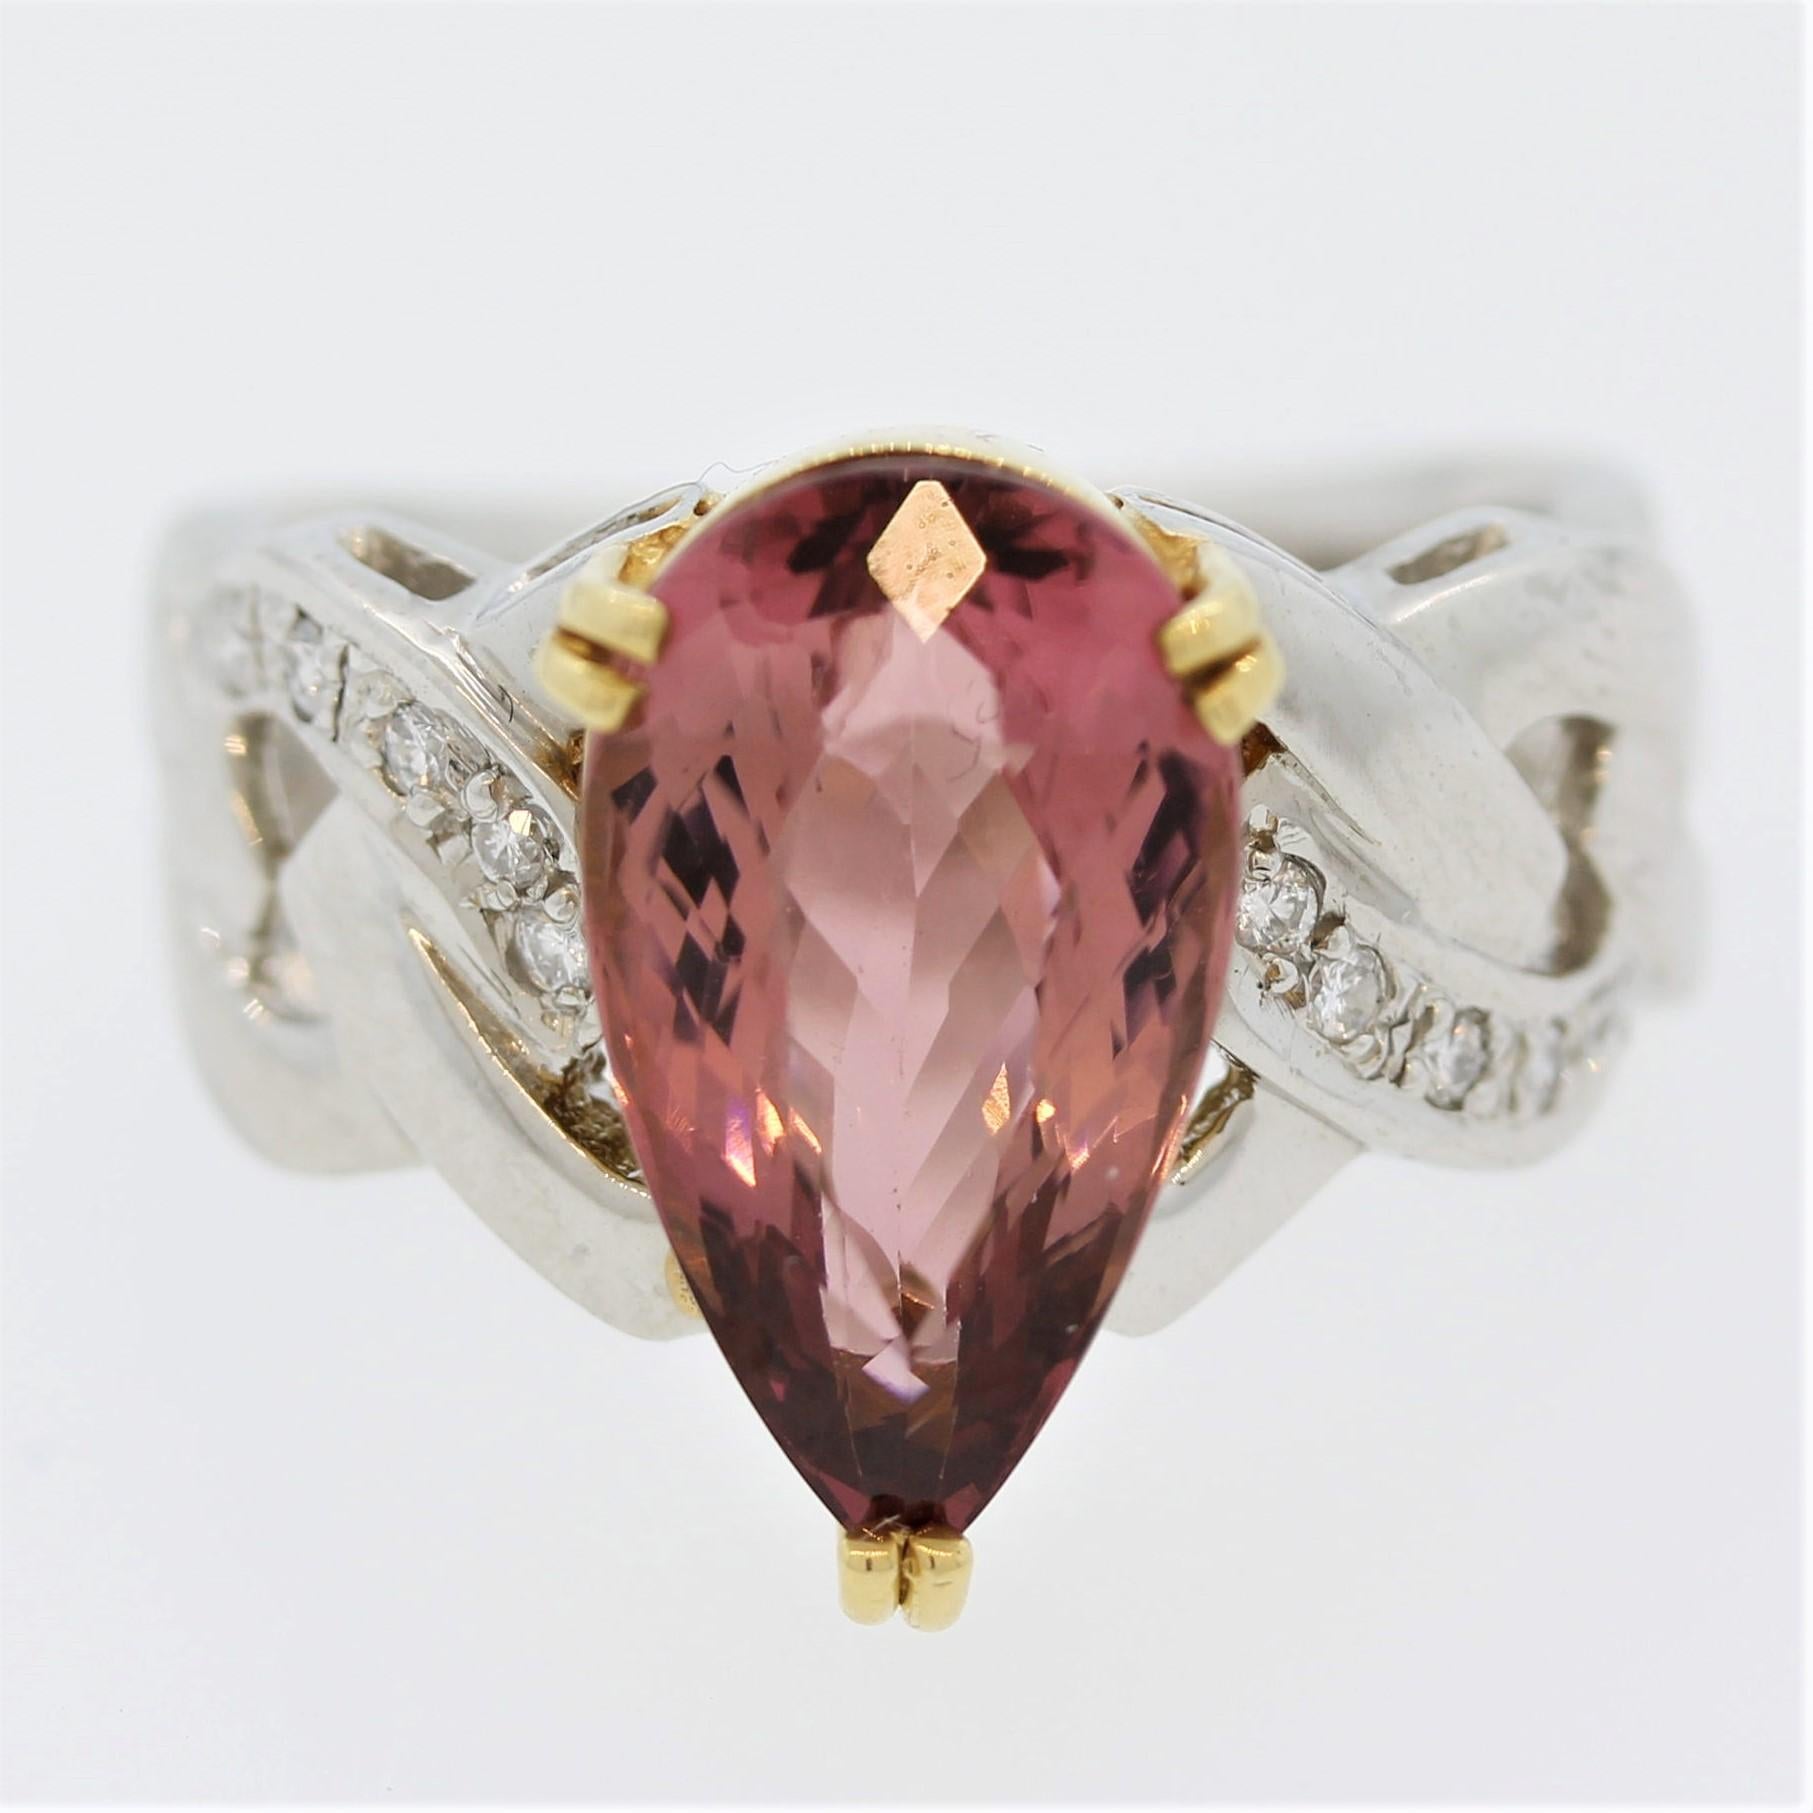 An elegant ring featuring a 5.12 carat pink tourmaline. It is cut as a pear shape and has a sweet soft color. It is accented by 0.10 carats of round brilliant cut diamonds set on the sides of the ring. Made in platinum and 18k yellow gold, this ring